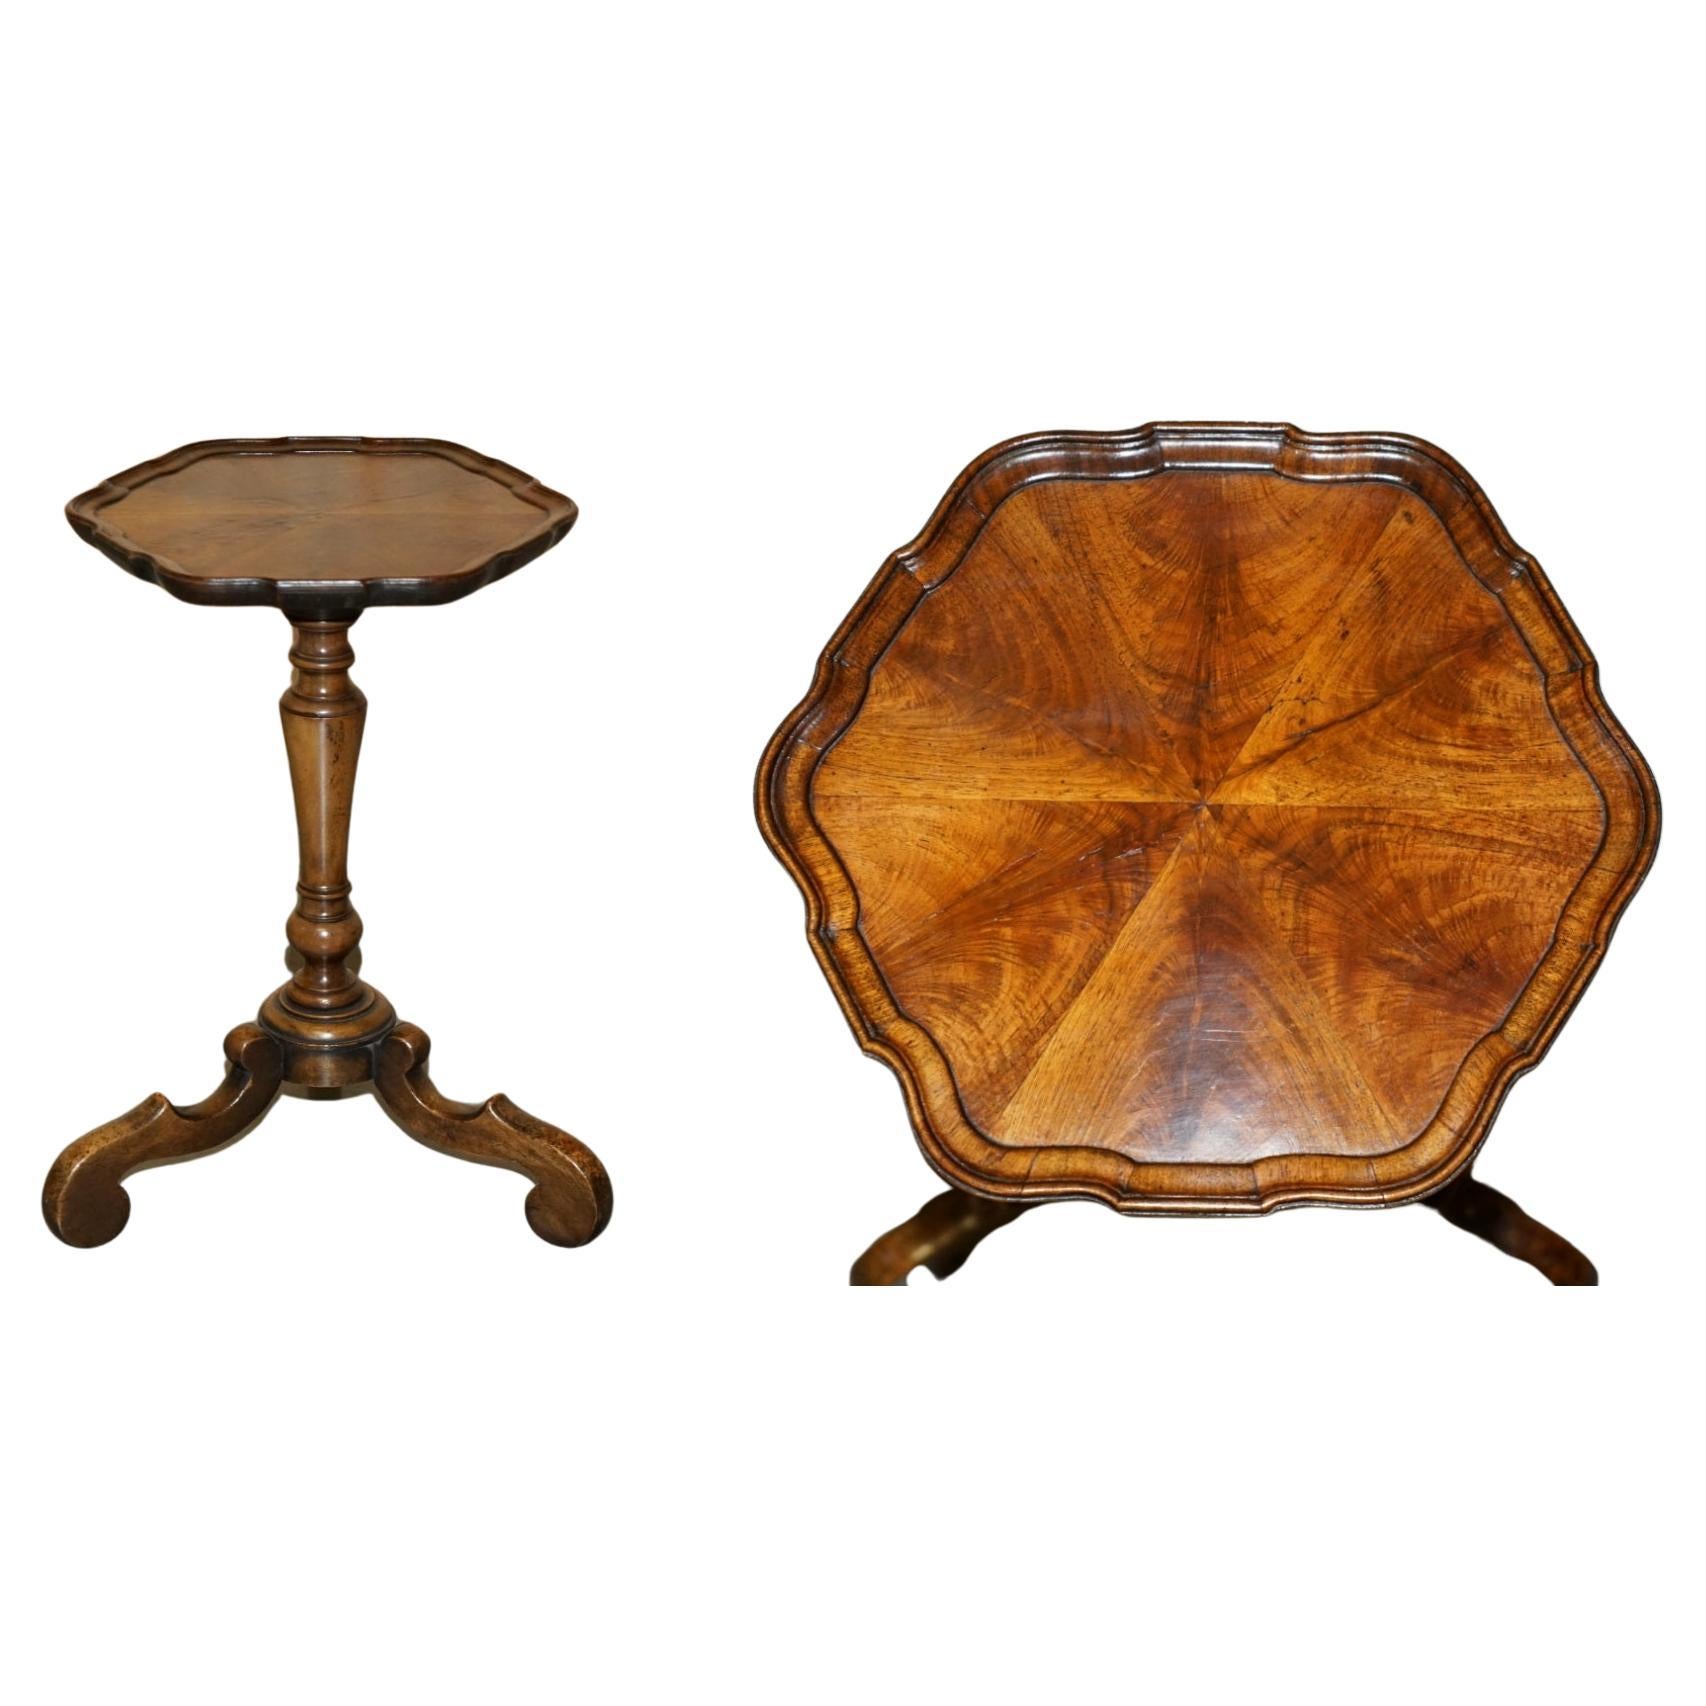 FULLY RESTORED ANTIQUE CHARLES TOZER OYSTER HARDWOOD TRIPOD SiDE END LAMP TABLE For Sale